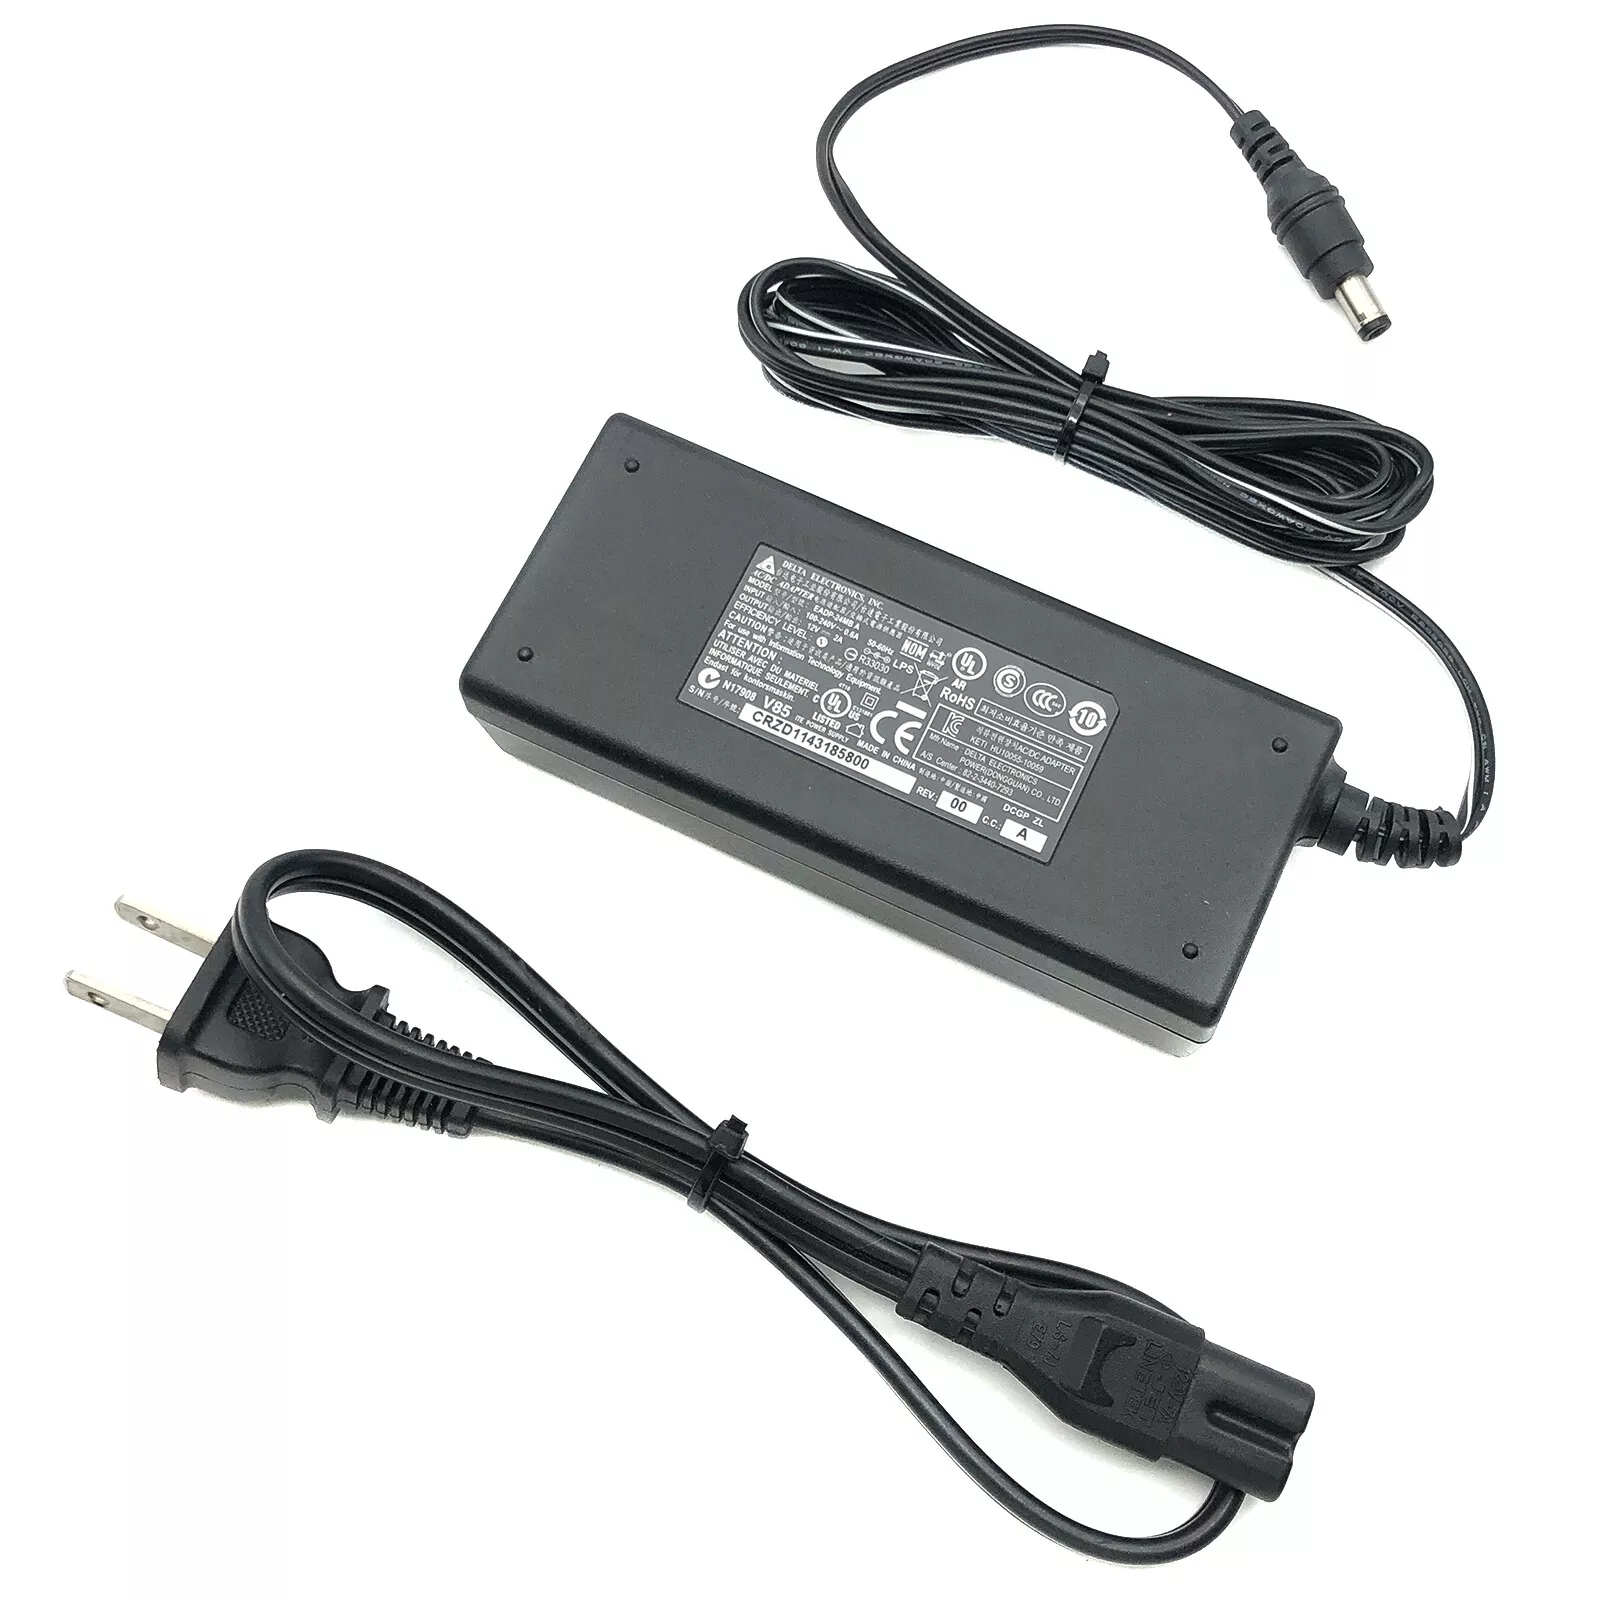 *Brand NEW*Genuine Delta EADP-24MB A 12V 2A 24W AC Adapter Power Supply